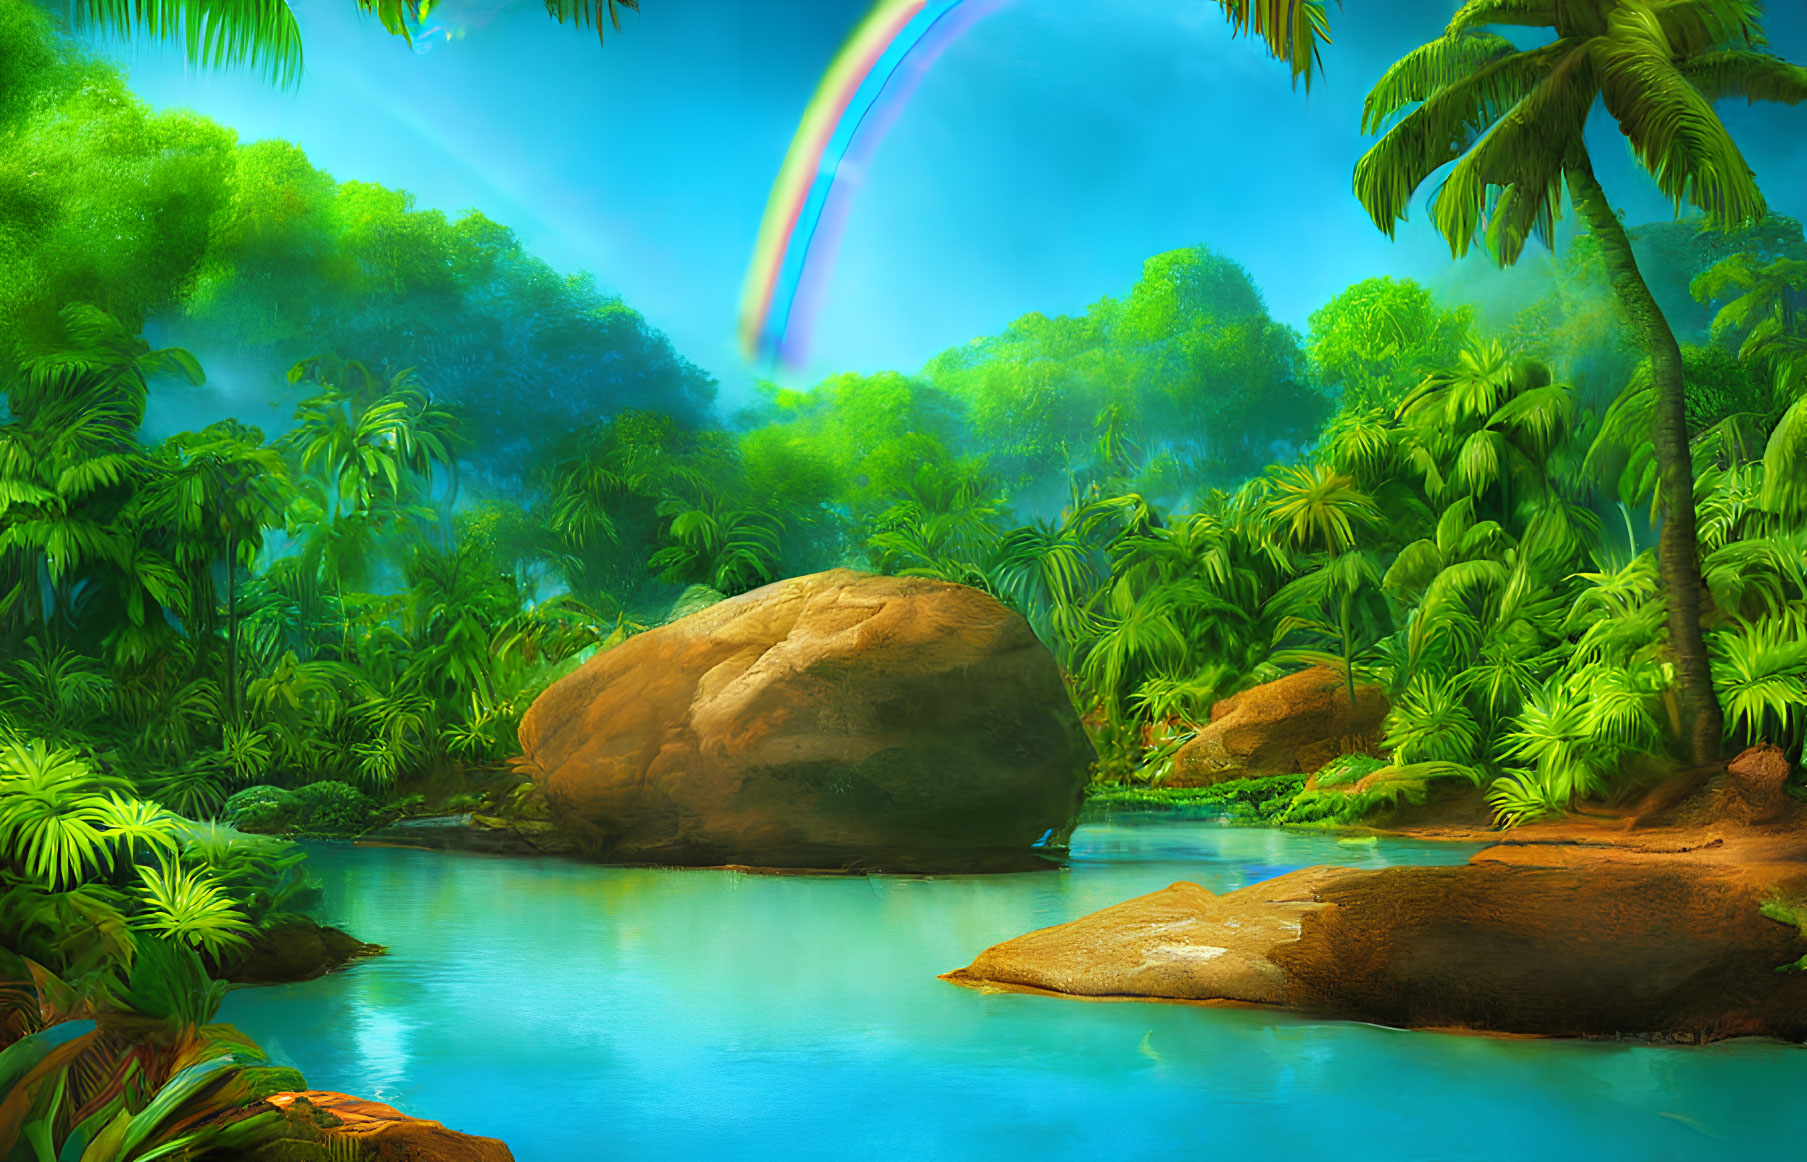 Vibrant tropical forest with blue river, boulders, and rainbow